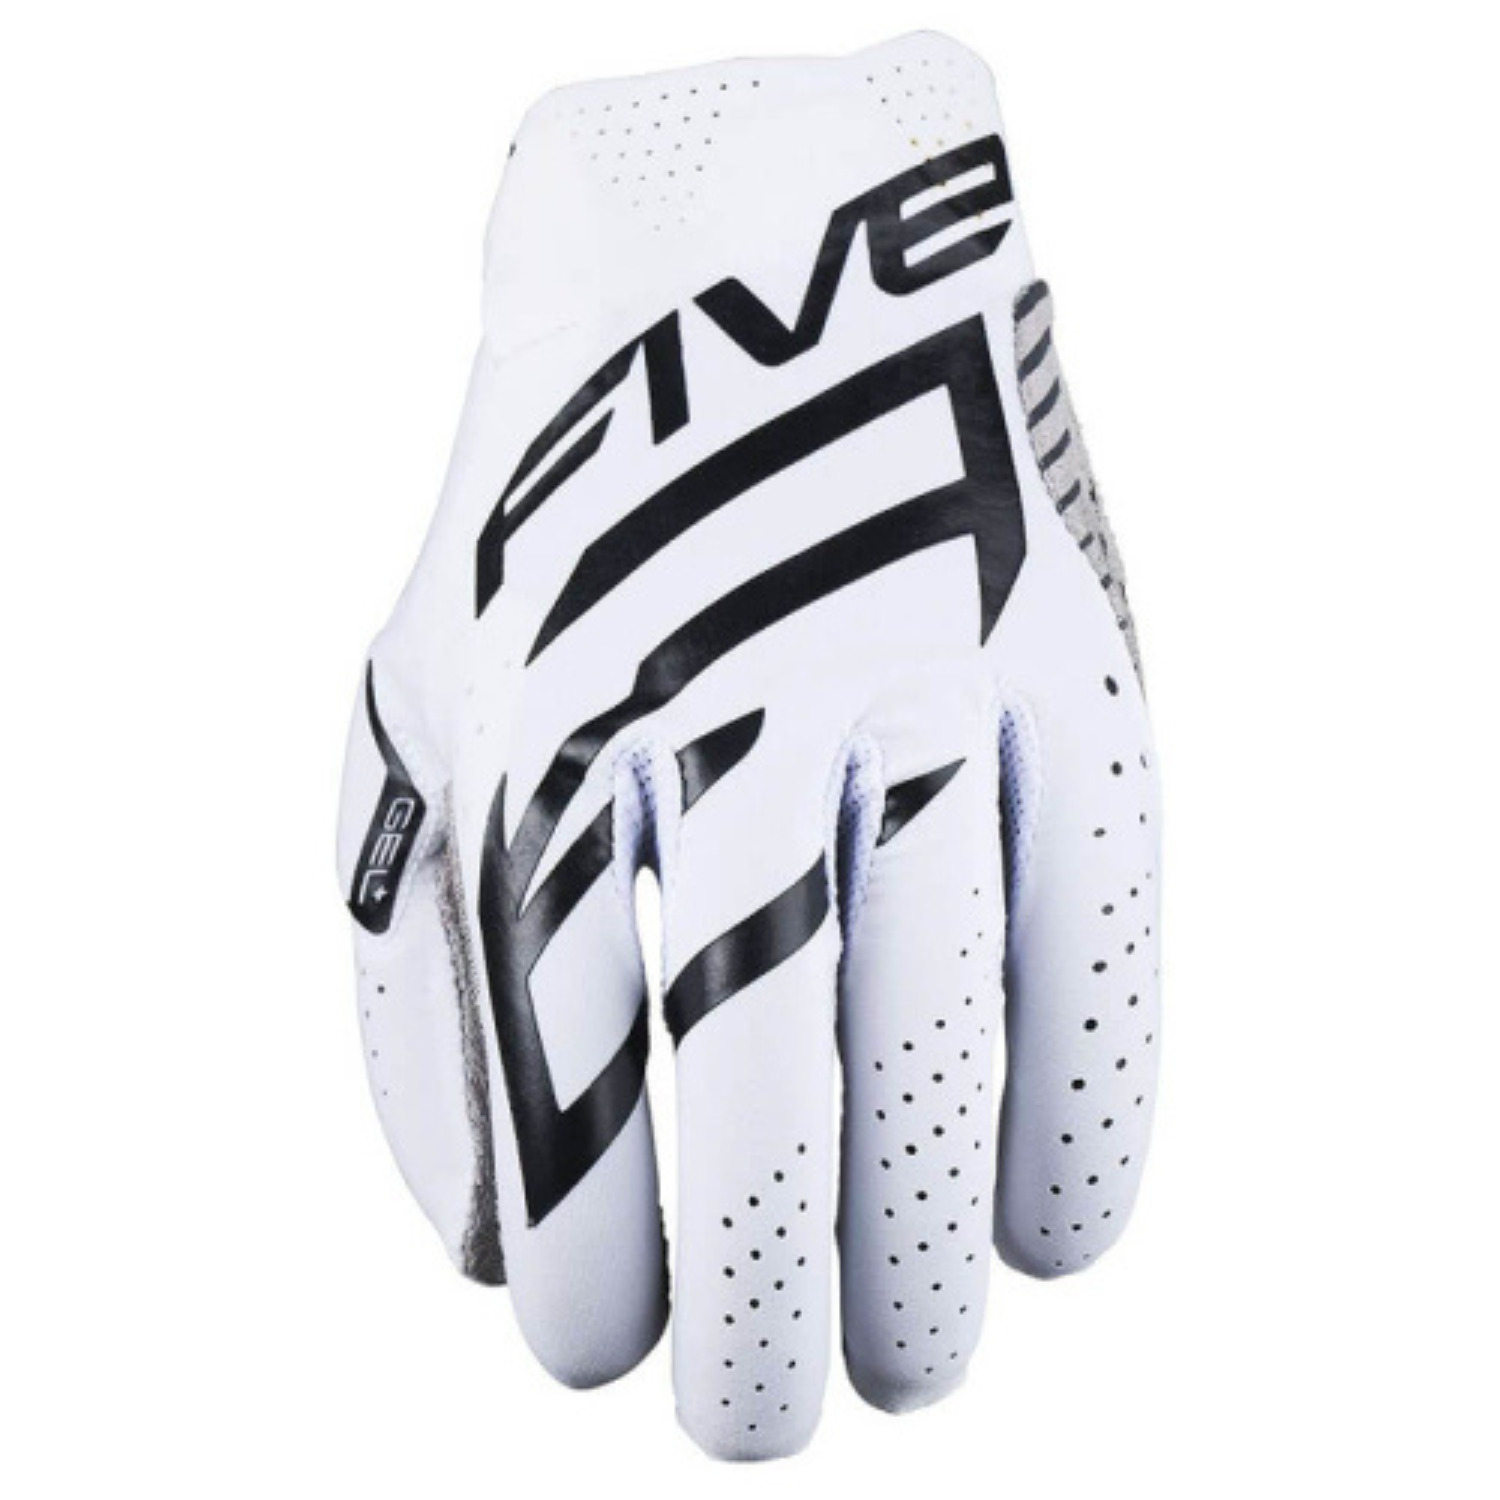 Image of Five MXF Race Gloves White Black Size L ID 3841300111693